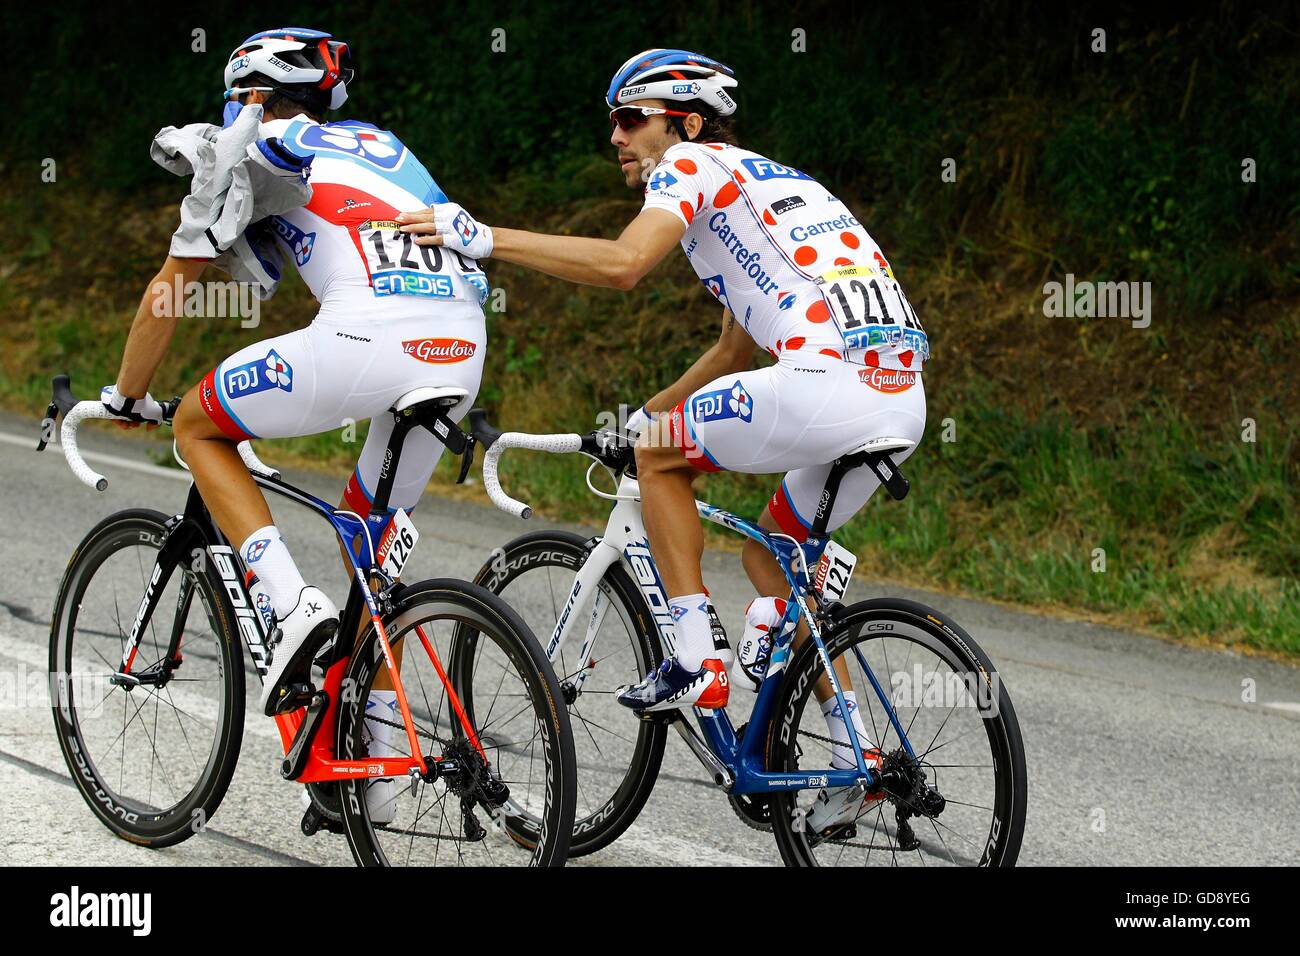 12.07.2017. Escaldes Engordany to Revel, France. Tour de France, stage 10. PINOT Thibaut (FRA) of FDJ chats with REICHENBACH Sebastien (SUI) of FDJ during stage 10 of the 2016 Tour de France a 197 km stage between Escaldes-Engordany and Revel, on July 12, 2016 in Revel, France Stock Photo